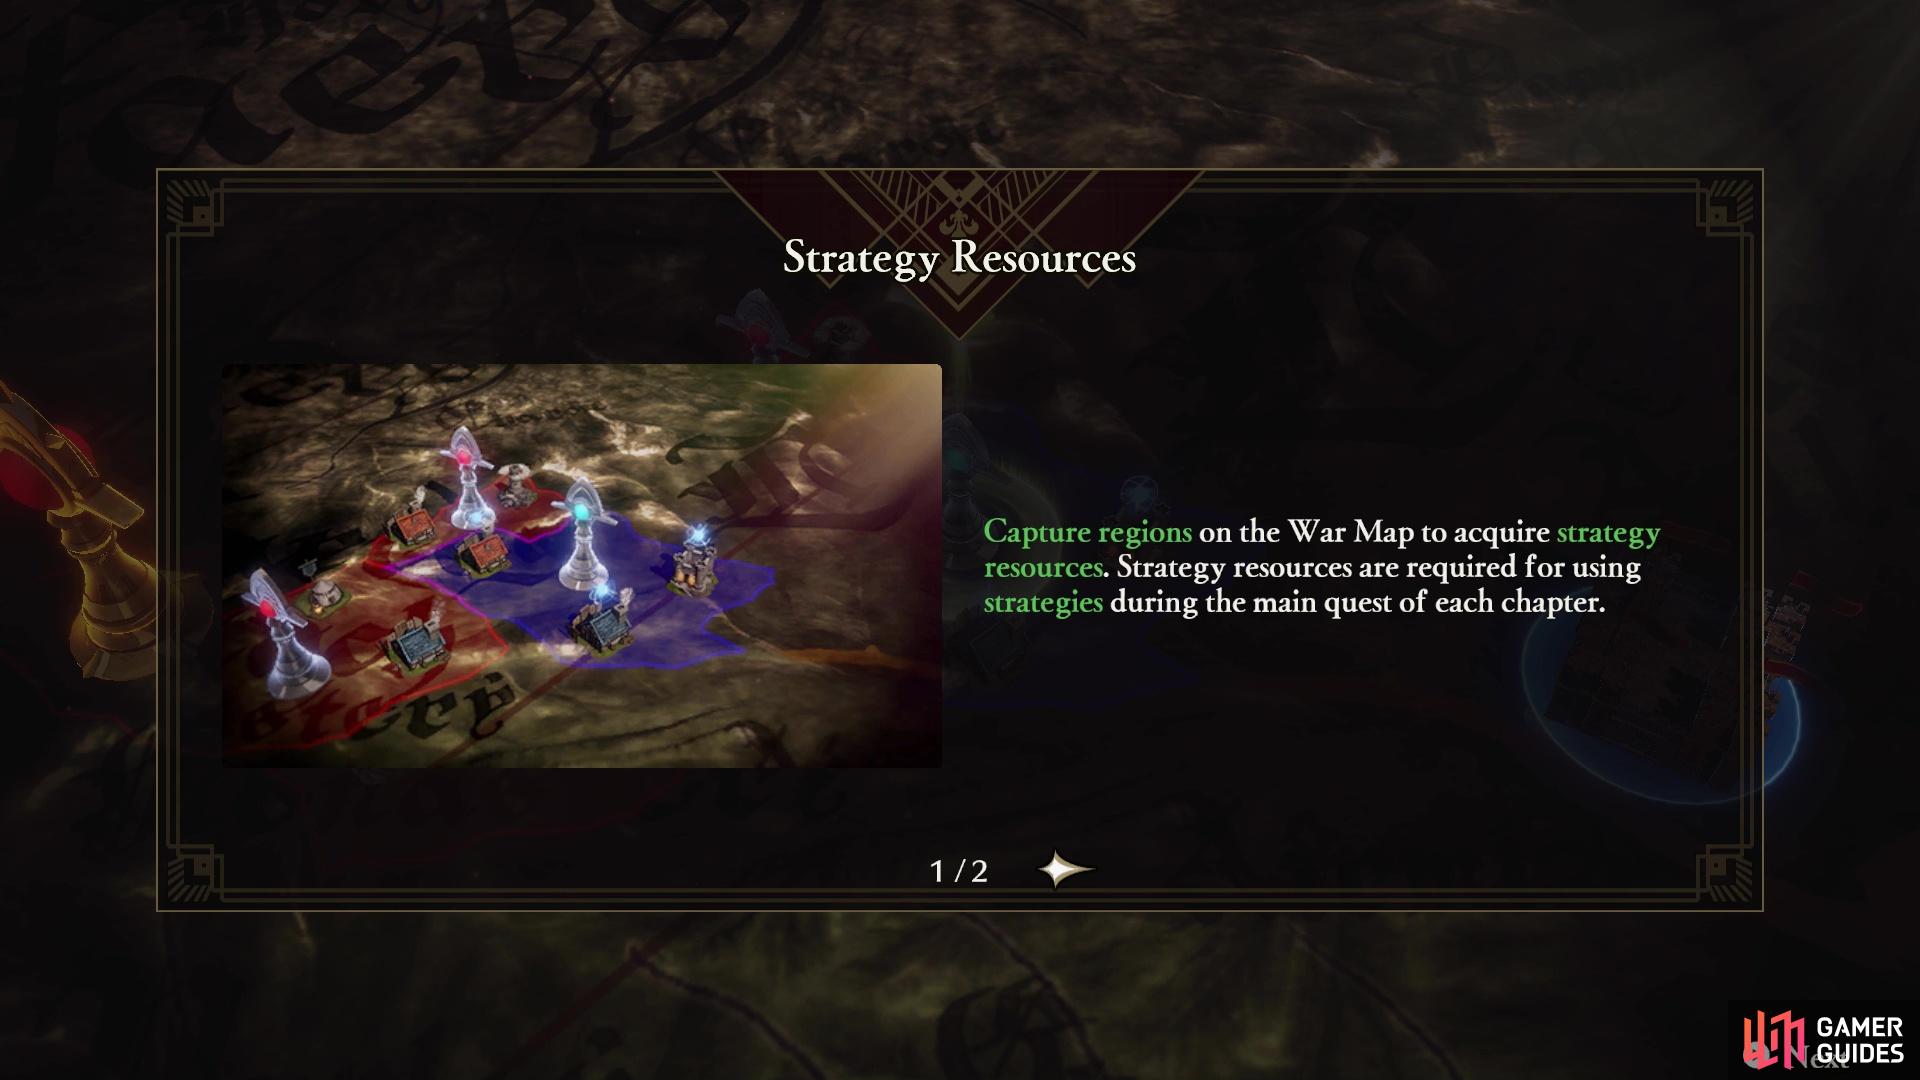 Strategy Resources will become useful during the main battle of the chapter